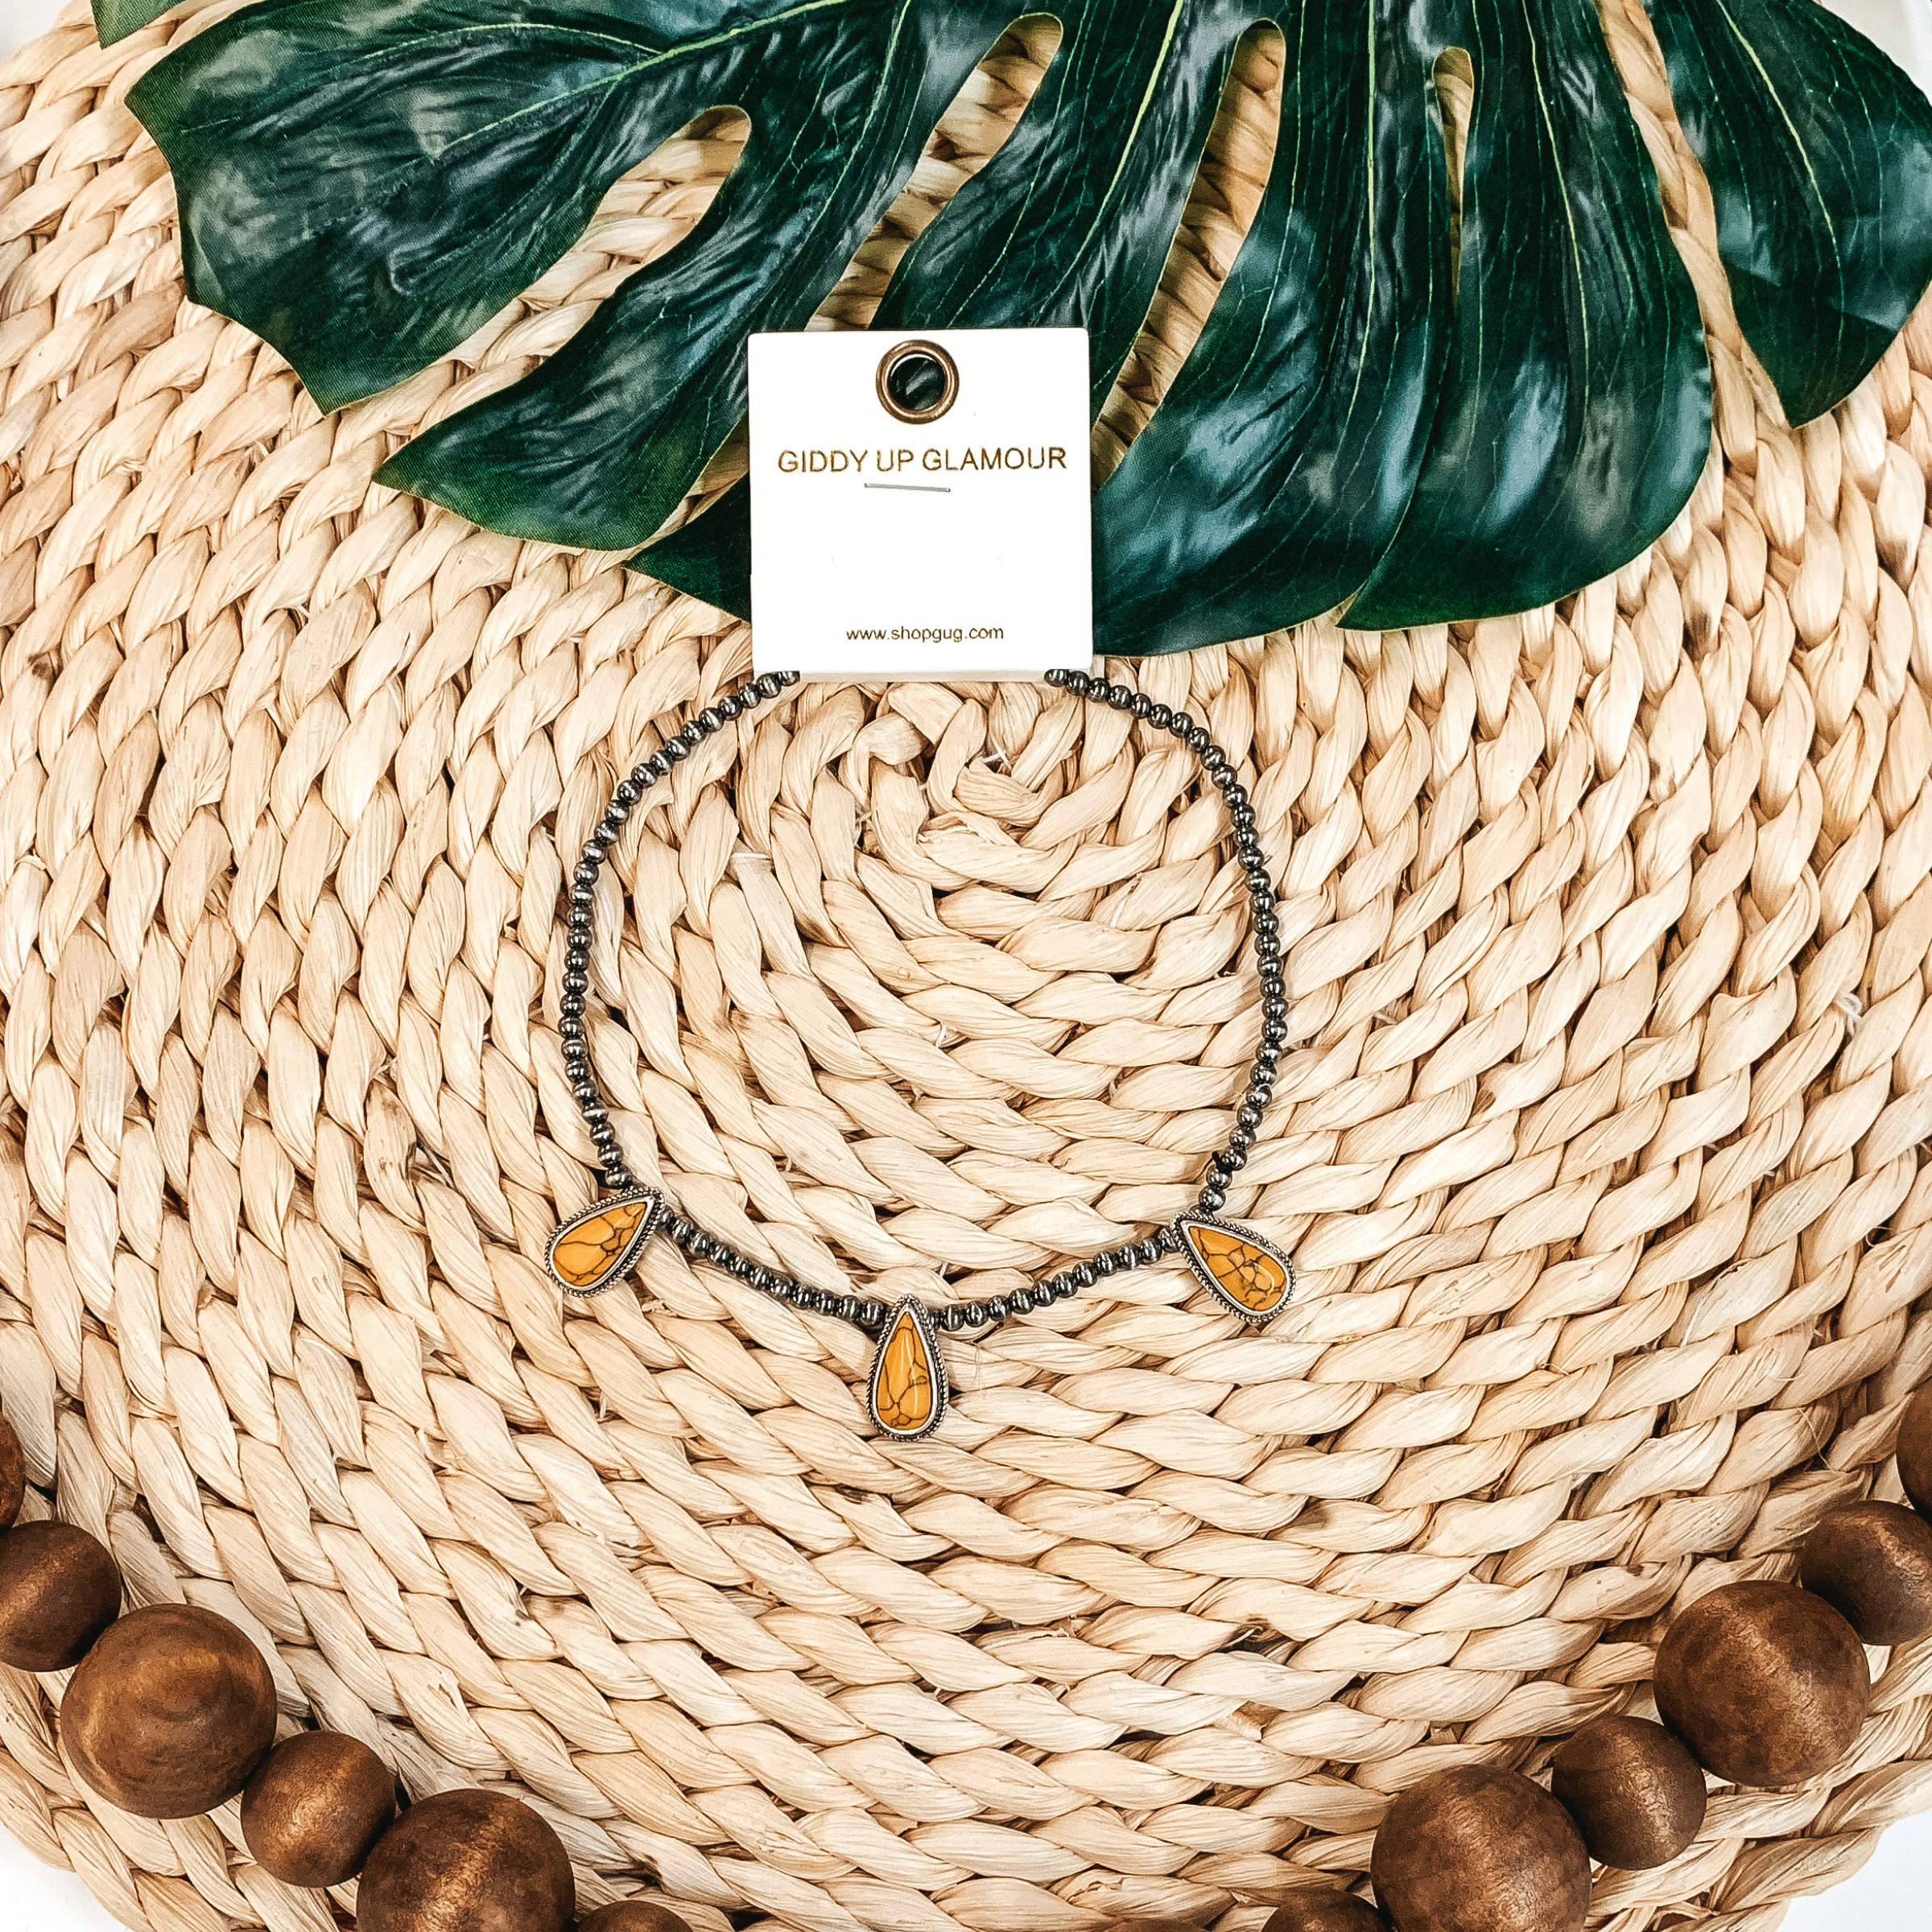 Silver beaded necklace with three yellow, teardrop stone charms. This necklace is pictured on a tan basket weave with a green leaf in the background. 